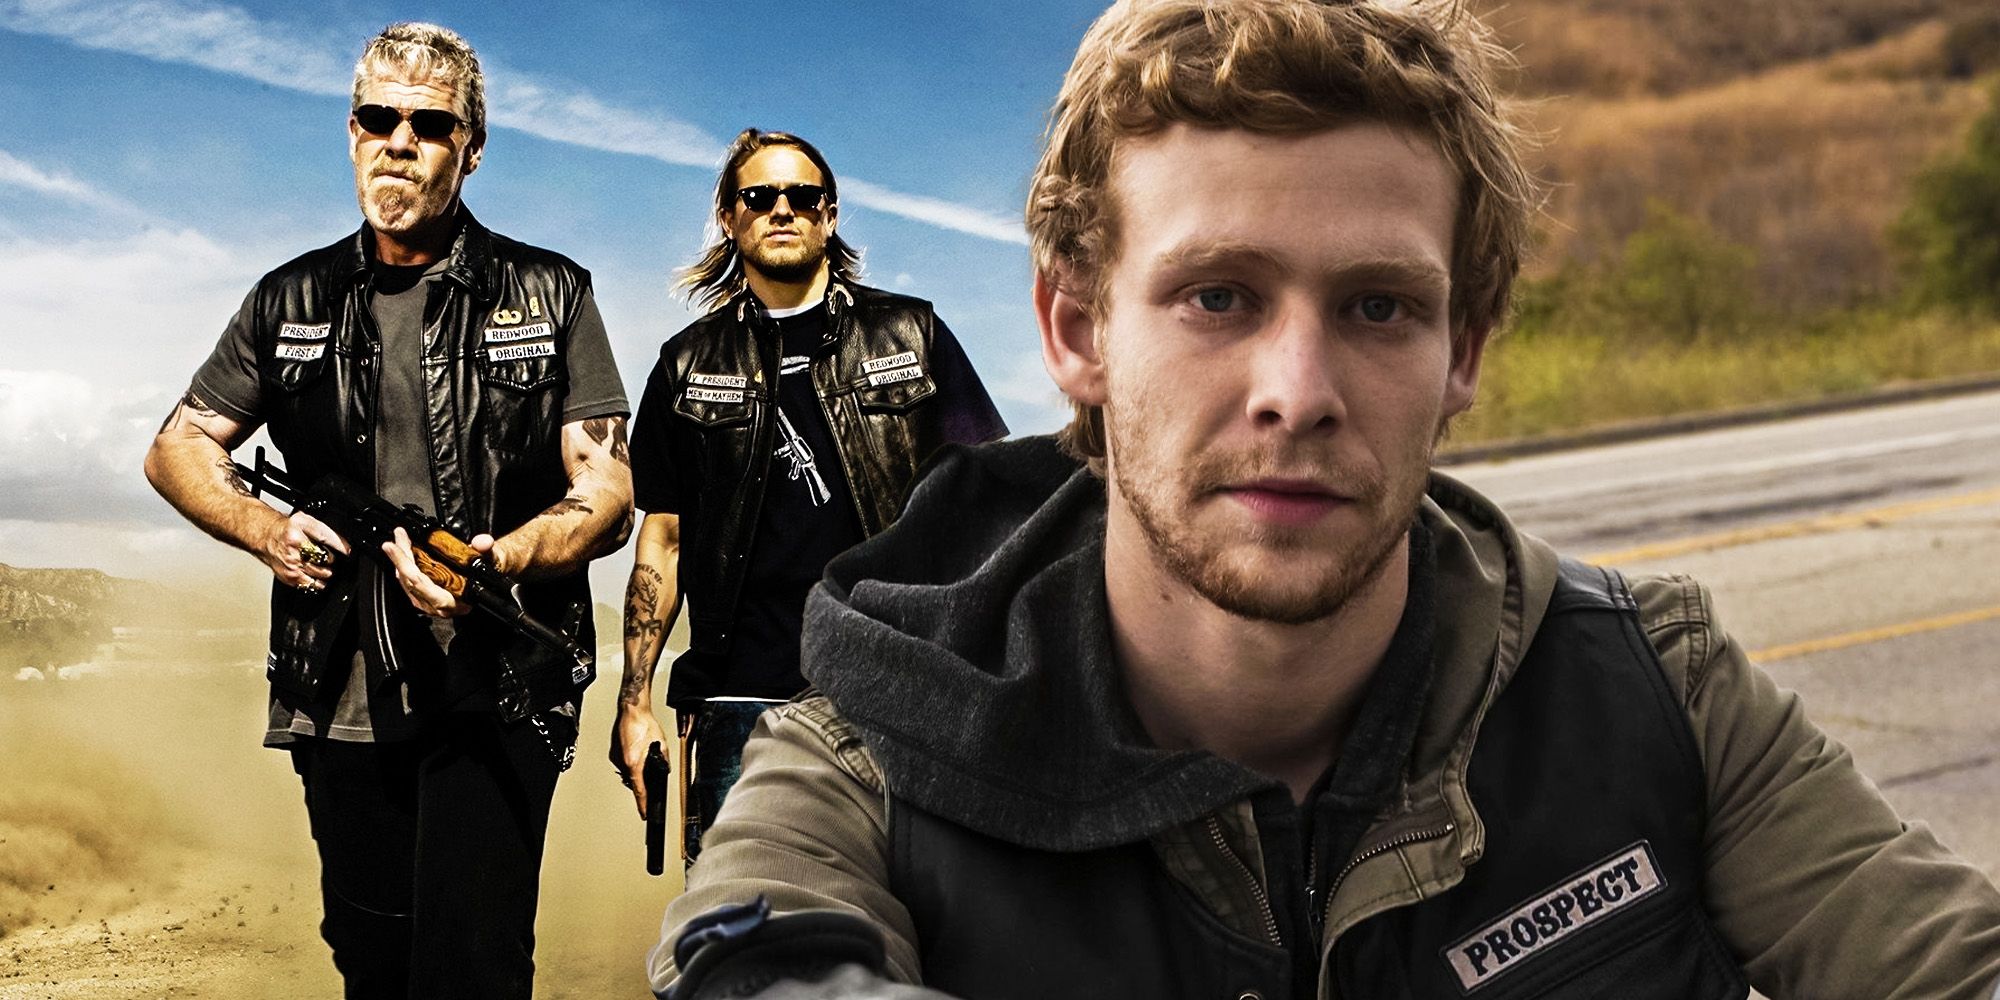 Ranking the 7 Seasons of Sons of Anarchy, From Worst to Best